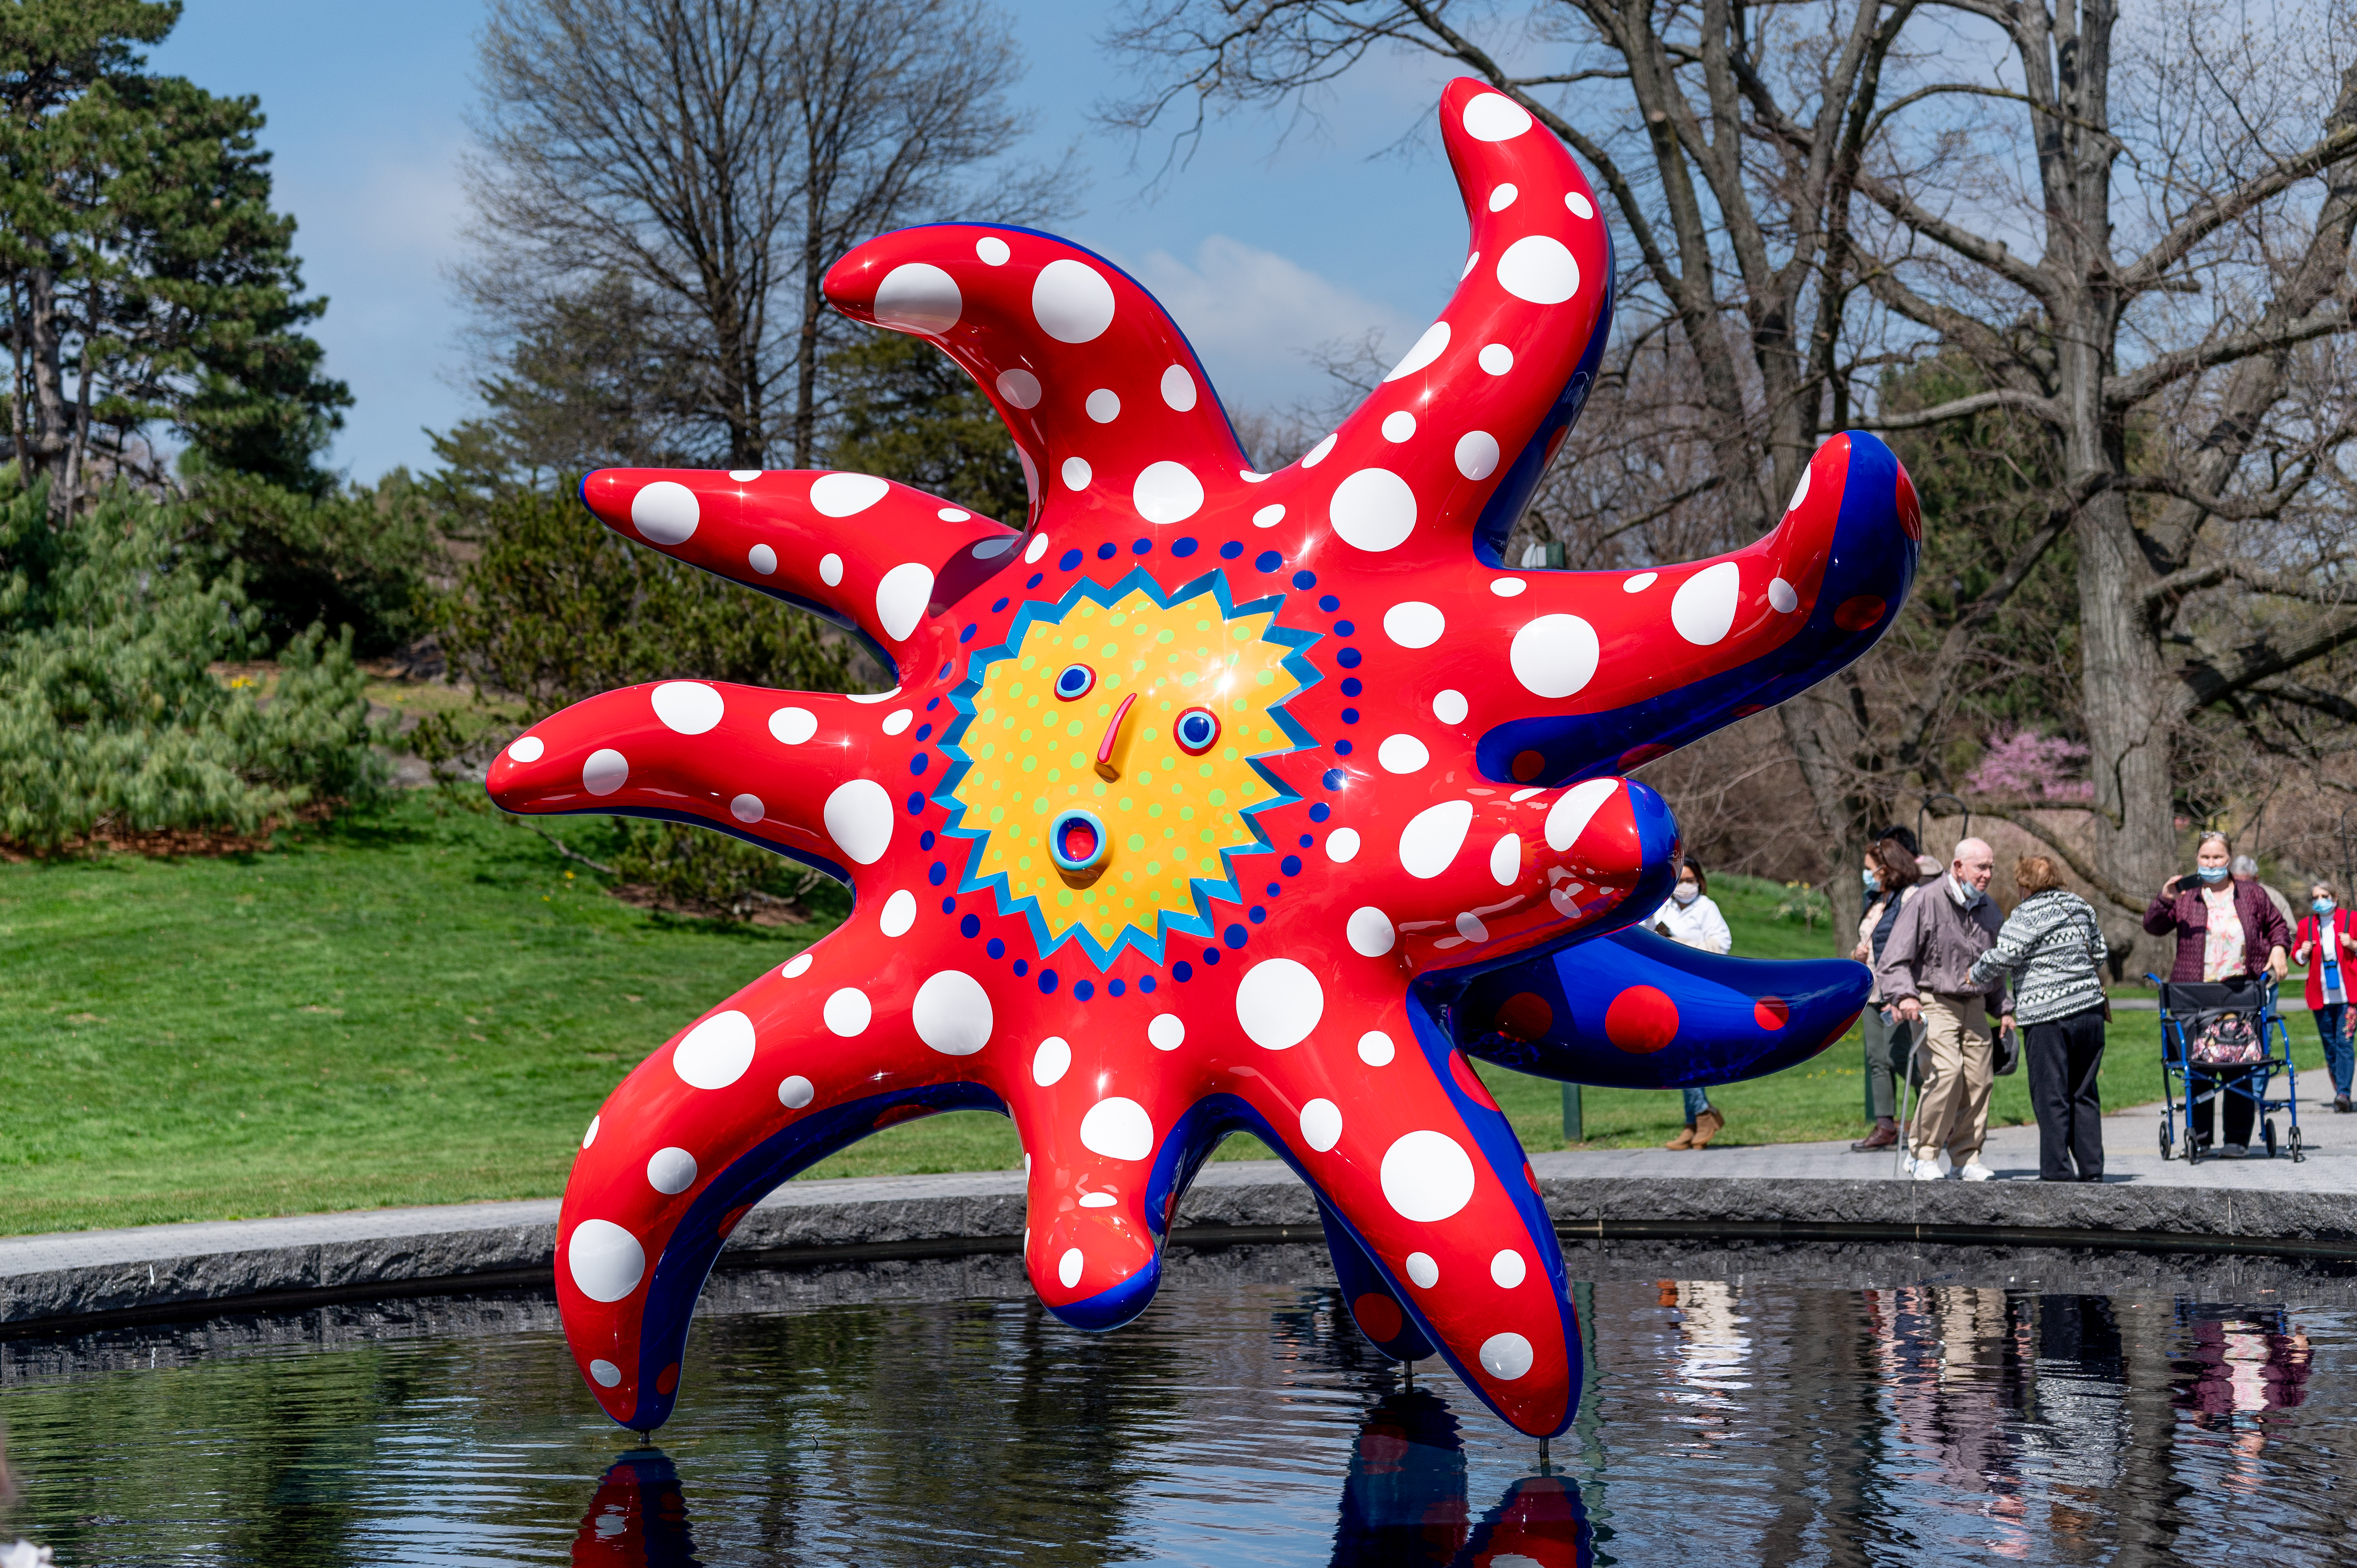 KUSAMA: Cosmic Nature at the NYBG & What She Really Thinks of NYC